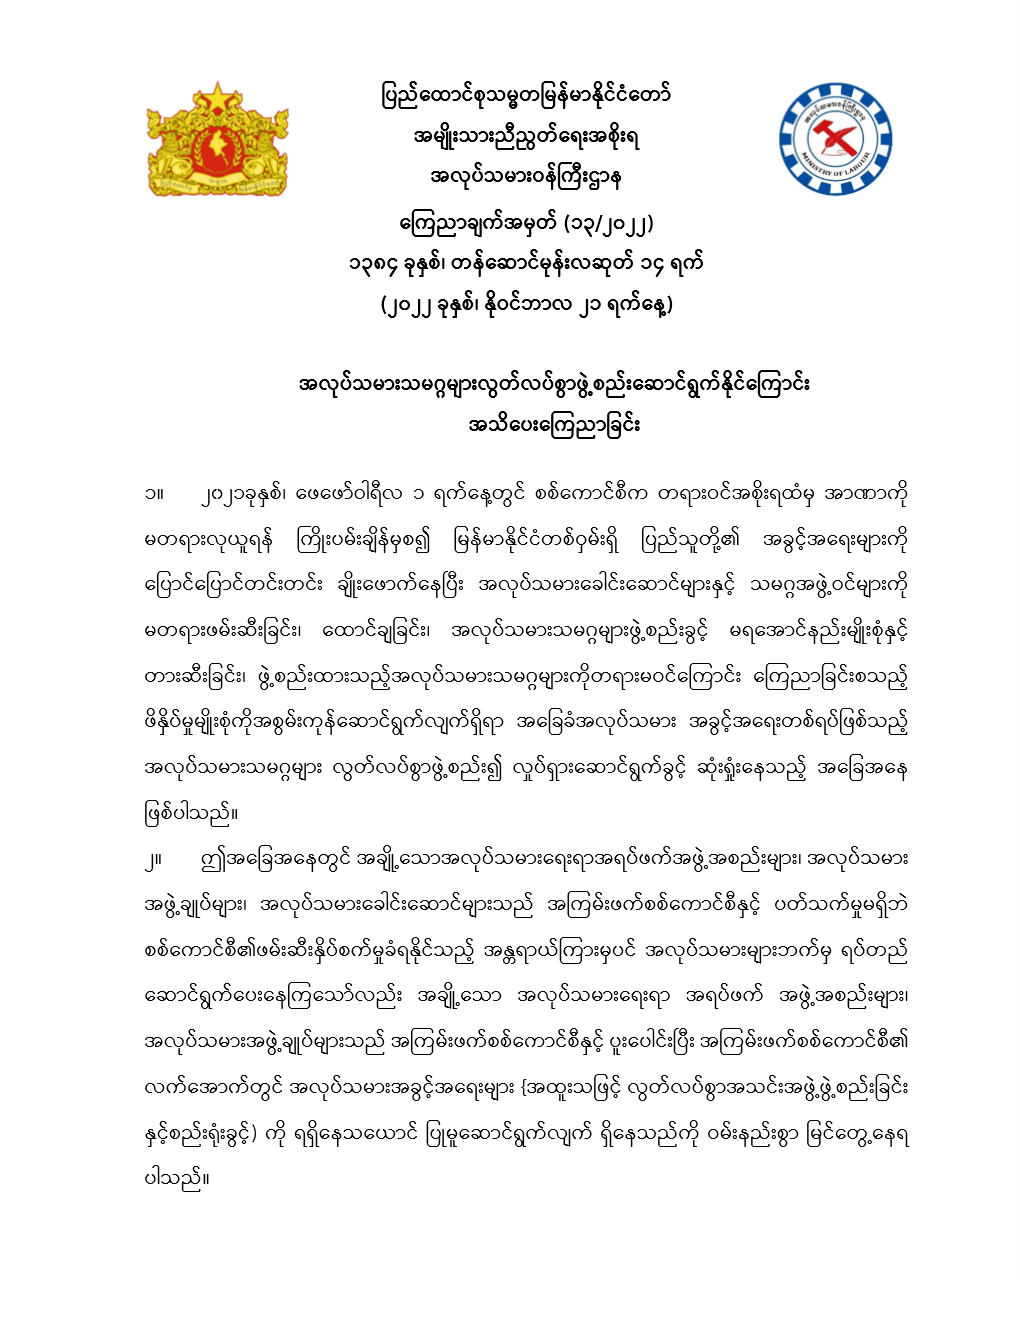 Ministry of Labour https://mol.nugmyanmar.org/my/announcements/2022-11-21-statement-13-2022/